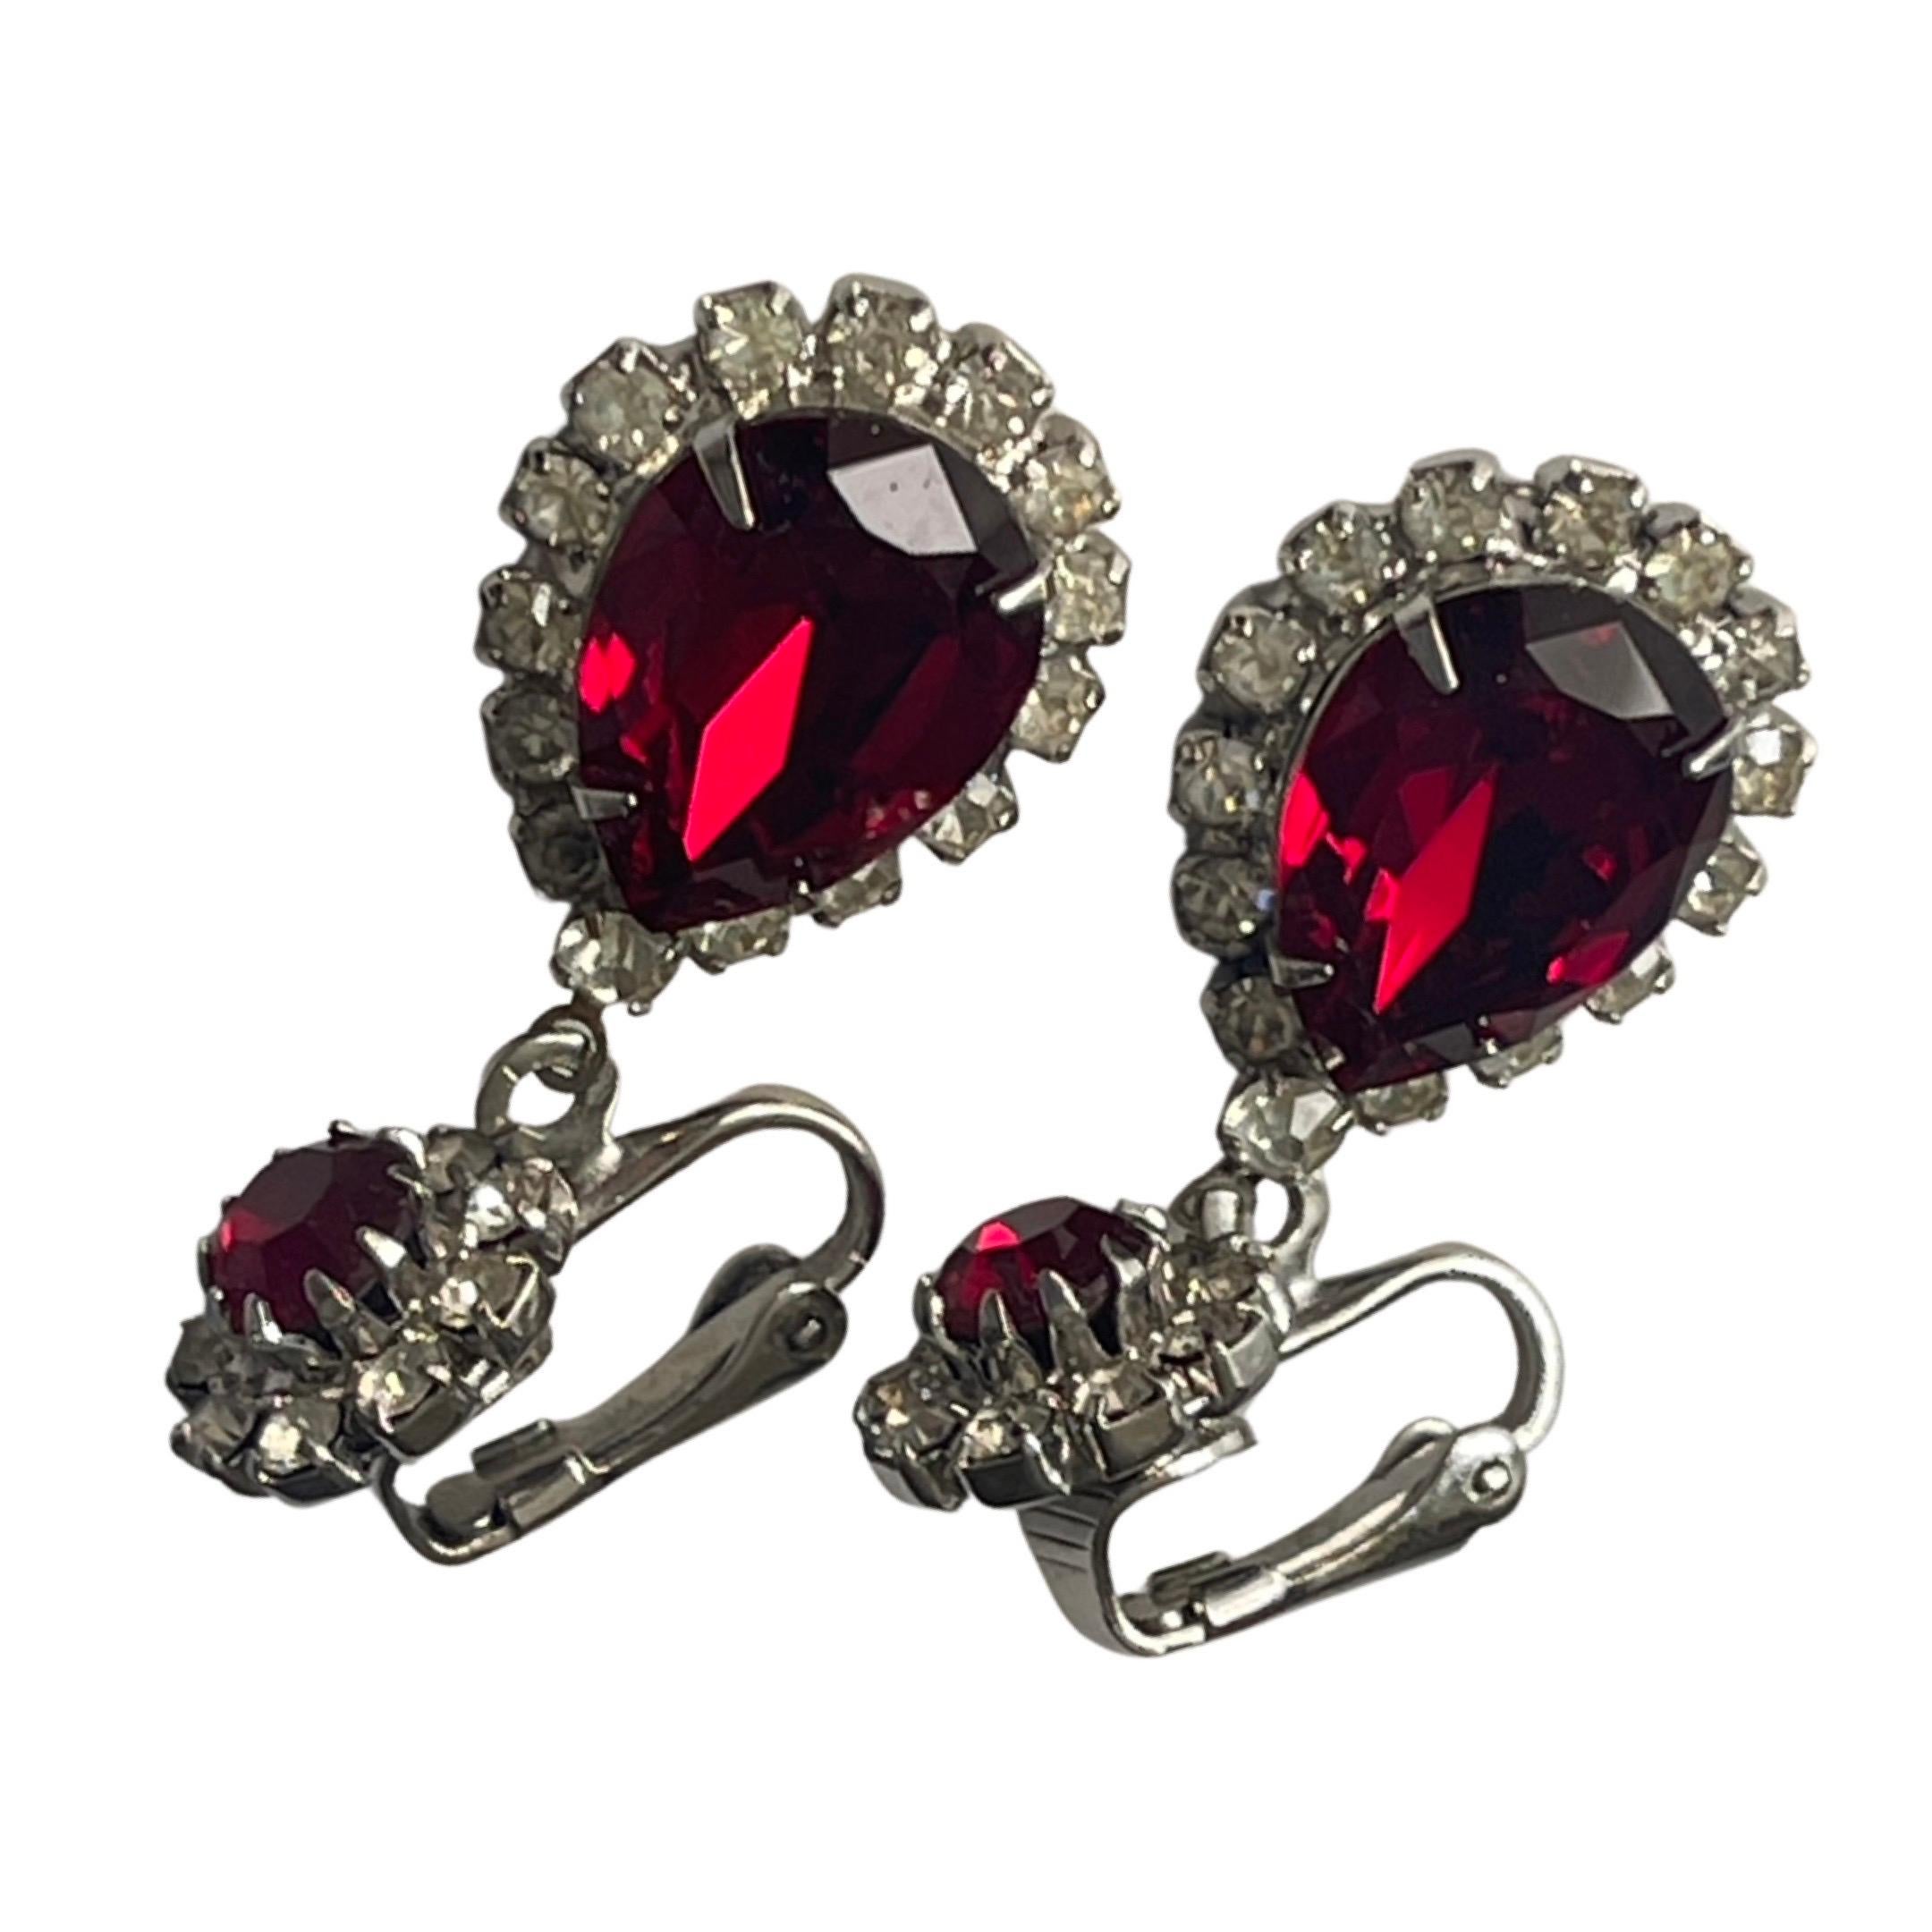 Designer Kramer Ruby Red Paddle Back Rhinestone Earrings Circa. 1955s -1960 In Good Condition For Sale In Galveston, TX